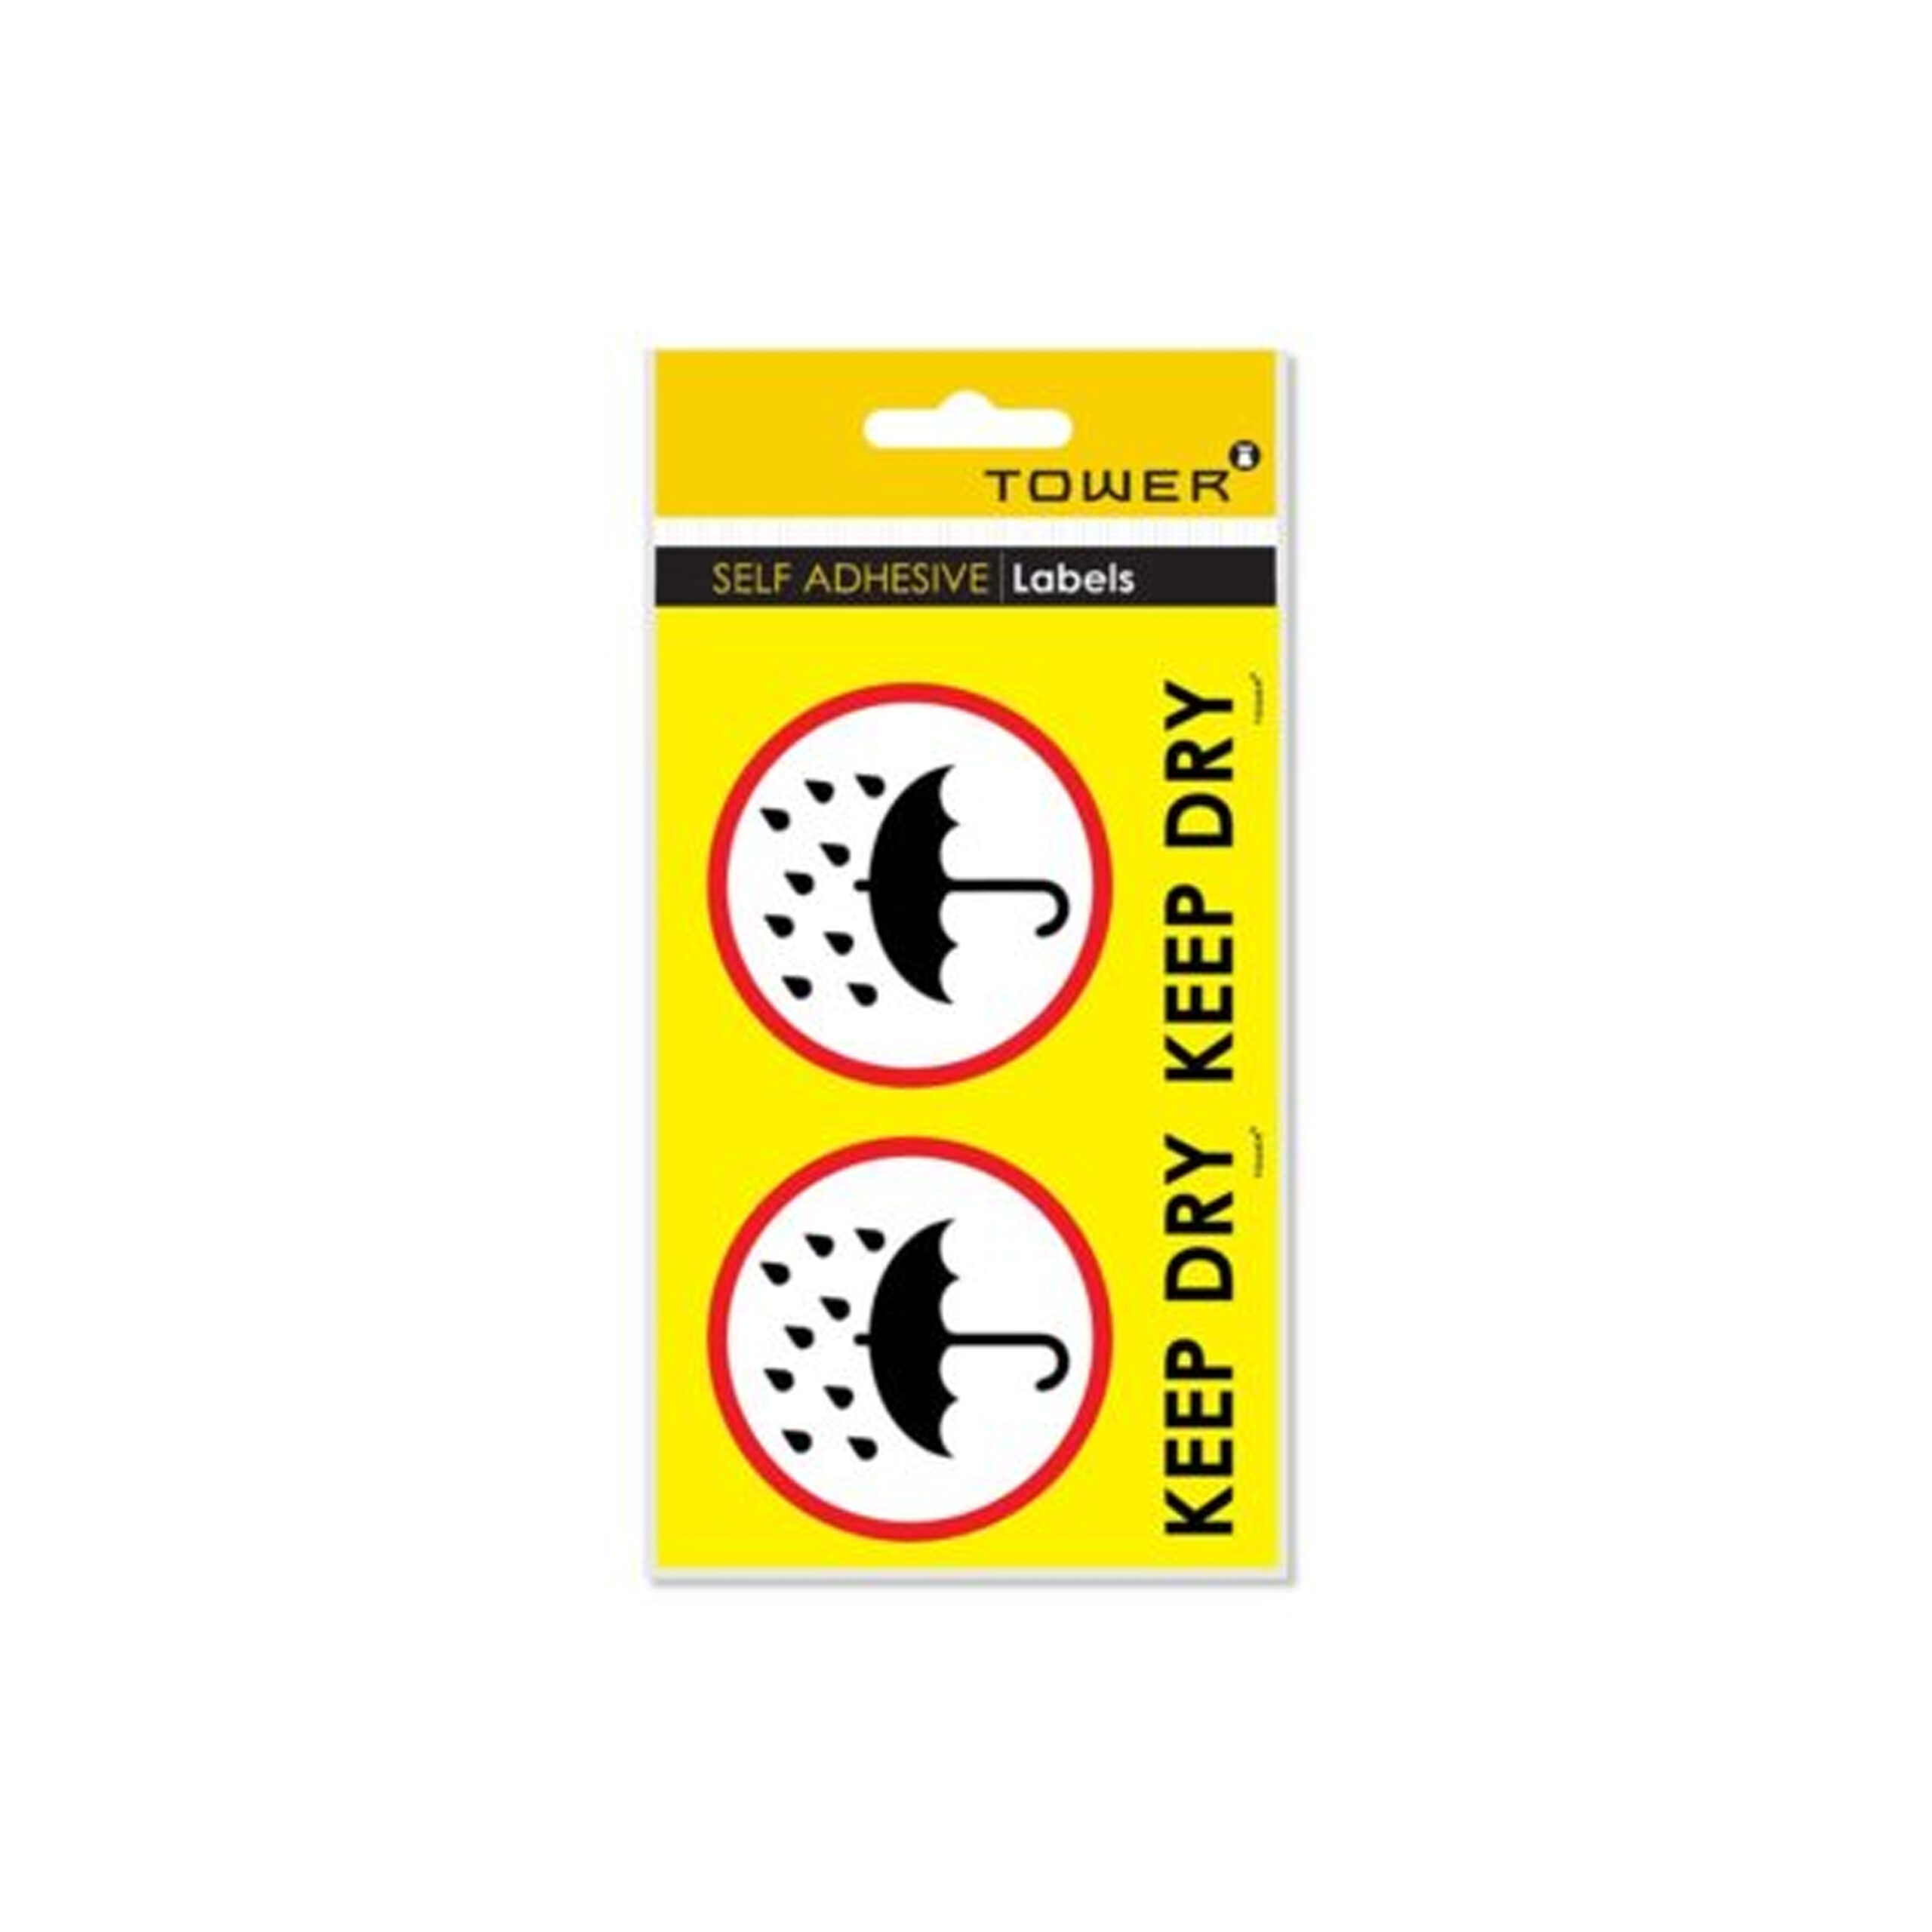 TOWER  SELF
ADHESIVE "KEEP
DRY" LABELS 
81x110mm (30
LABELS)